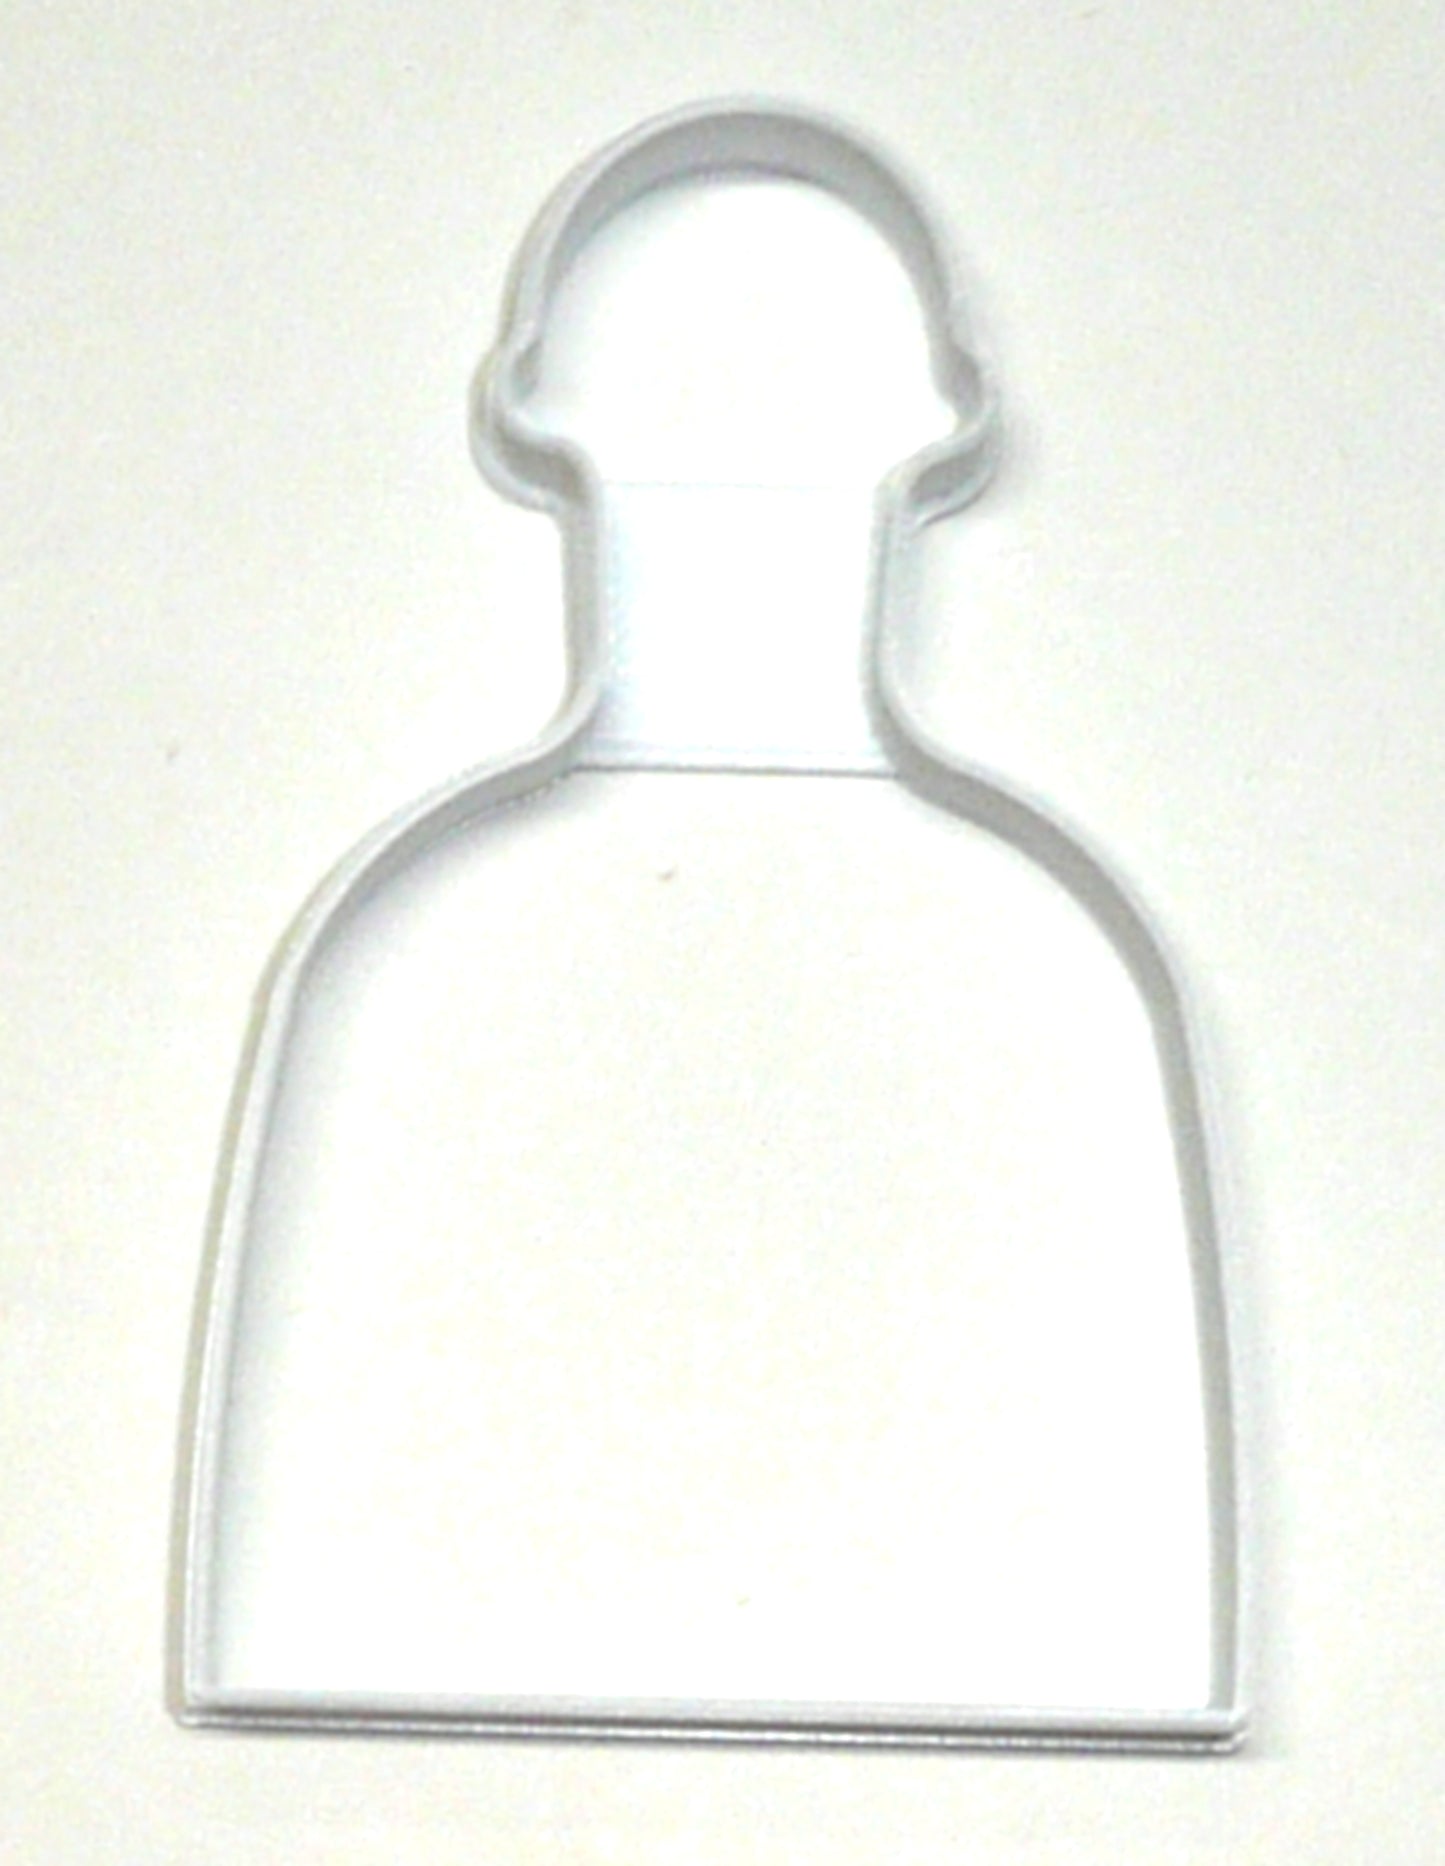 6x Tequila Bottle Alcohol Fondant Cutter Cupcake Top Size 1.75 Inch USA FD2862